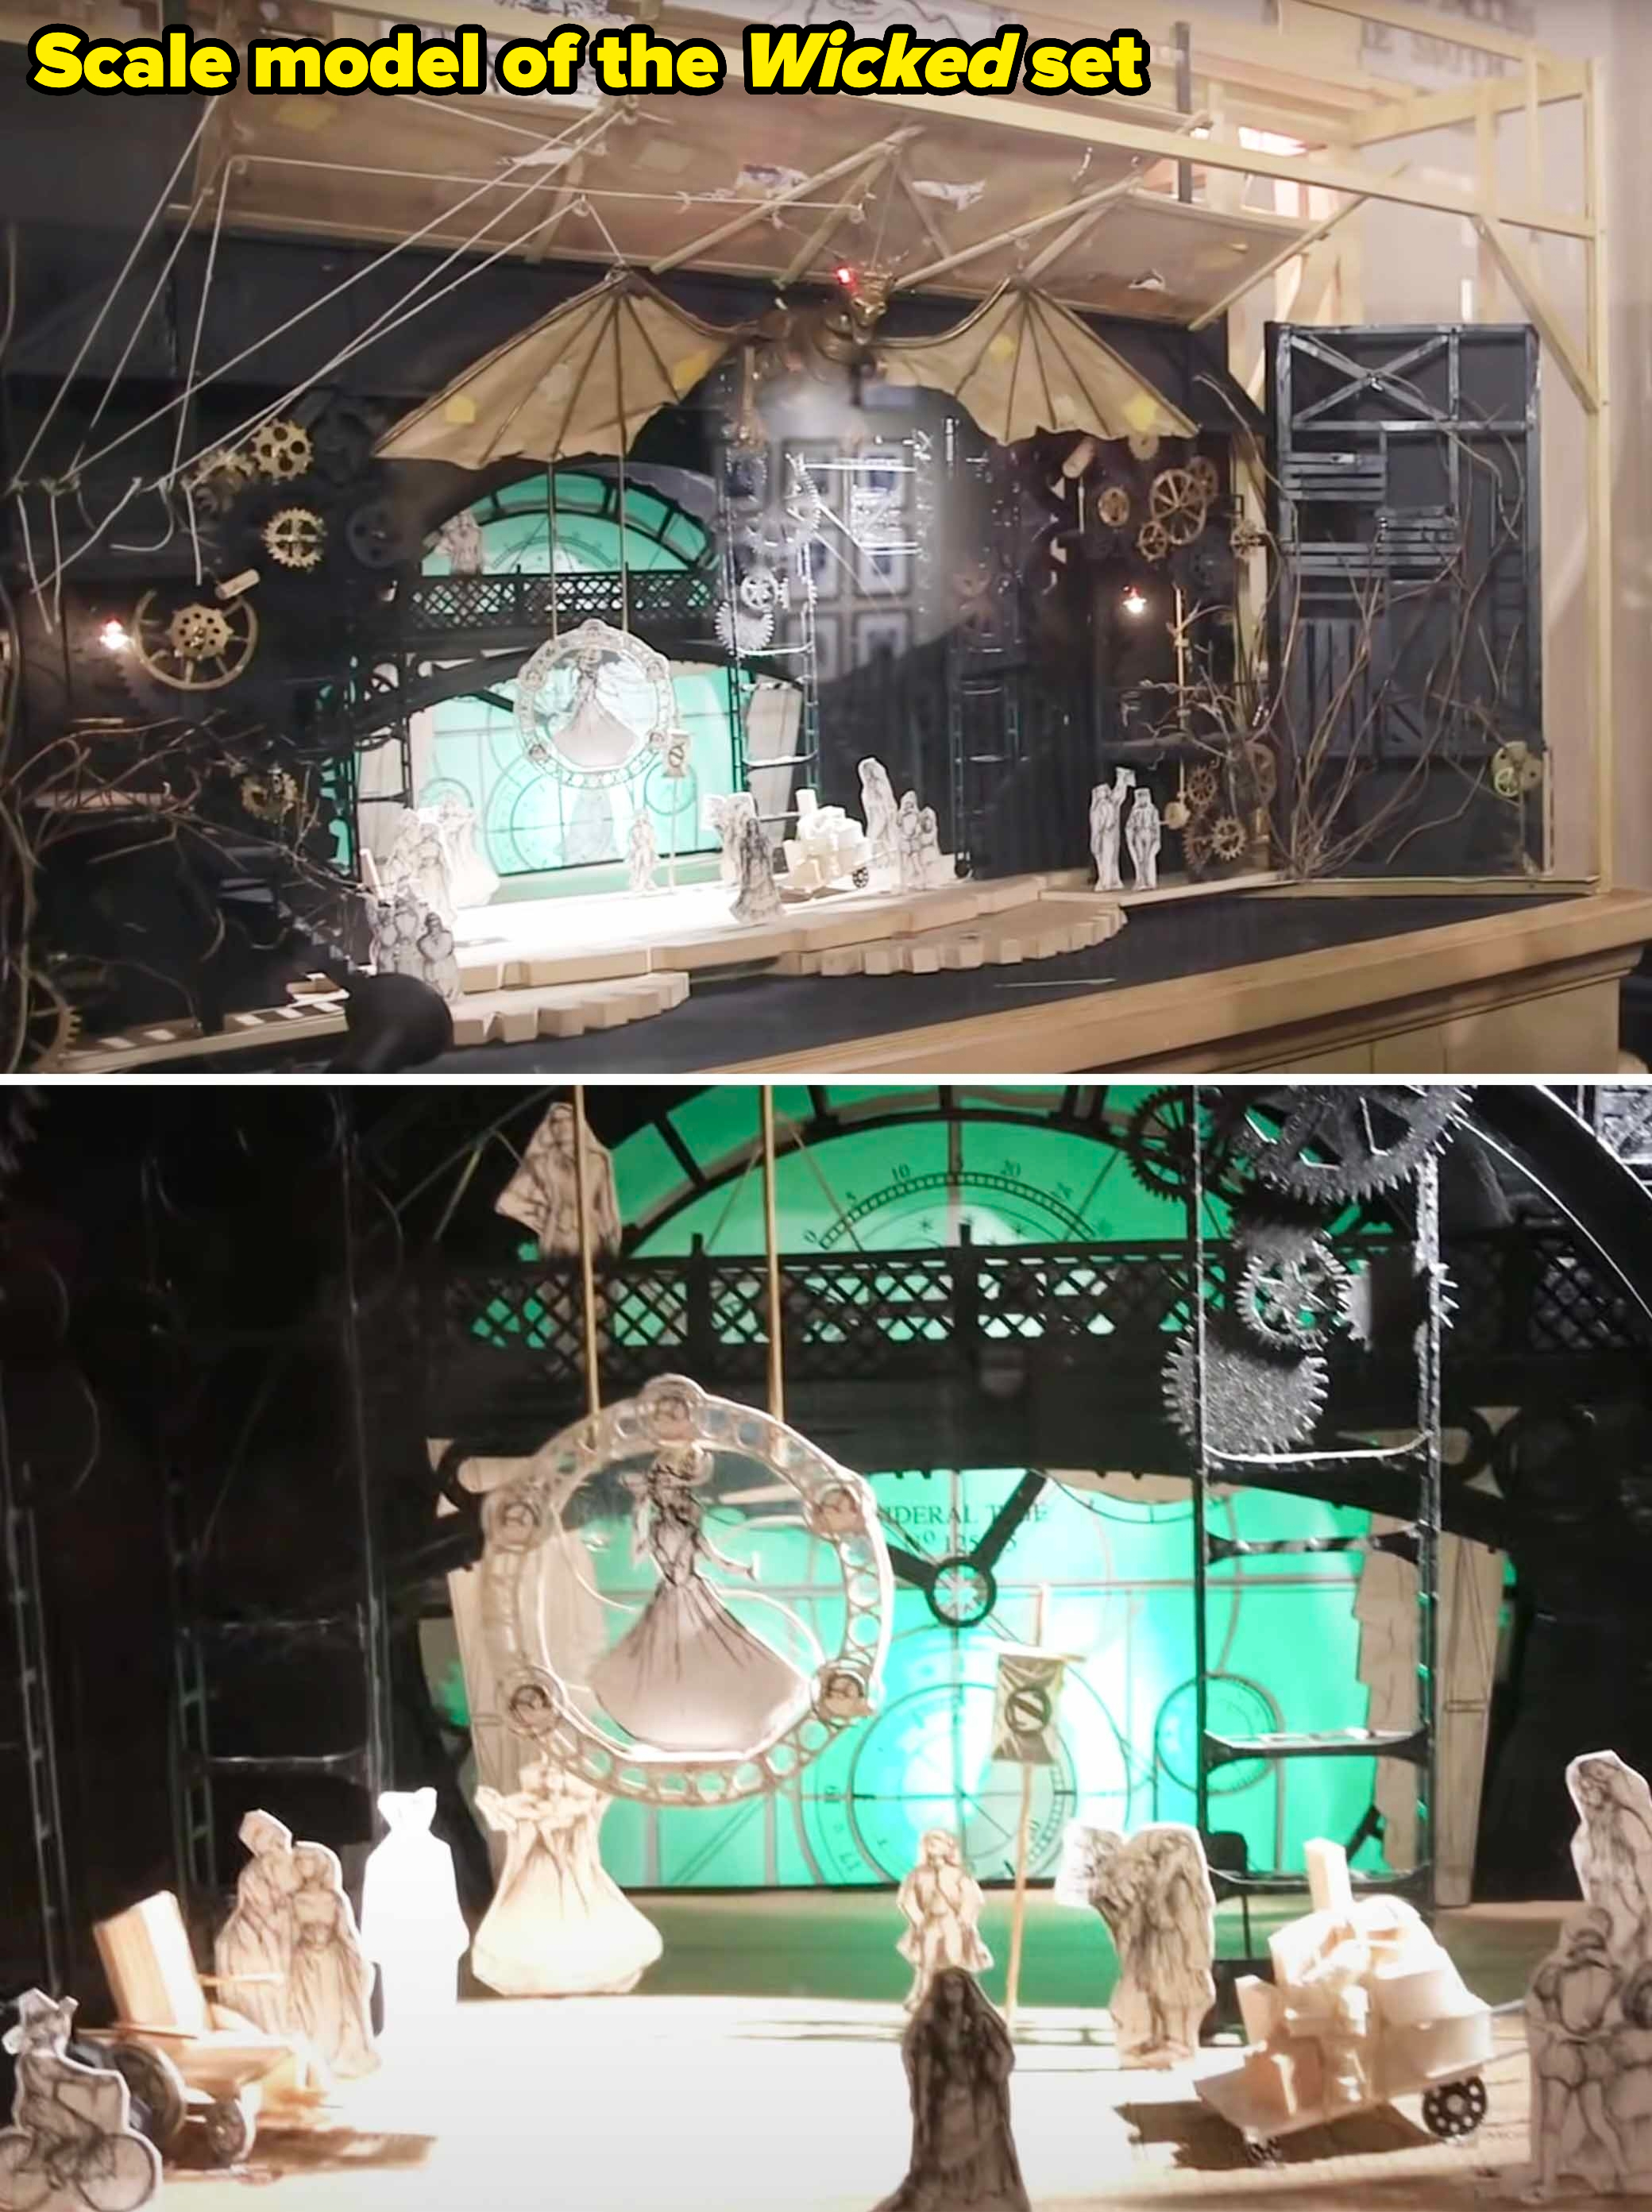 Scale model of the Wicked set